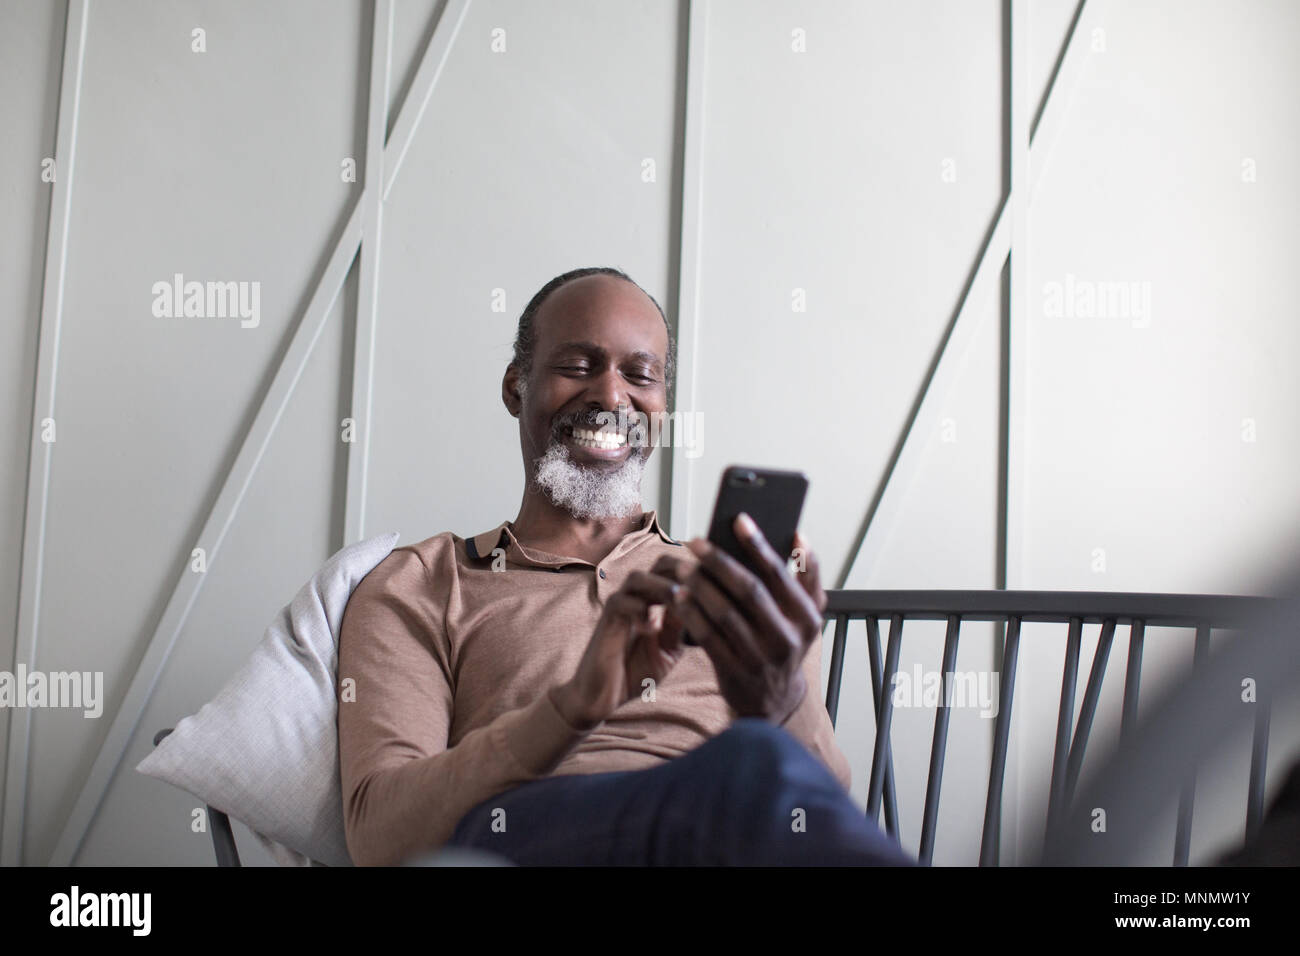 African American senior male using smartphone Banque D'Images